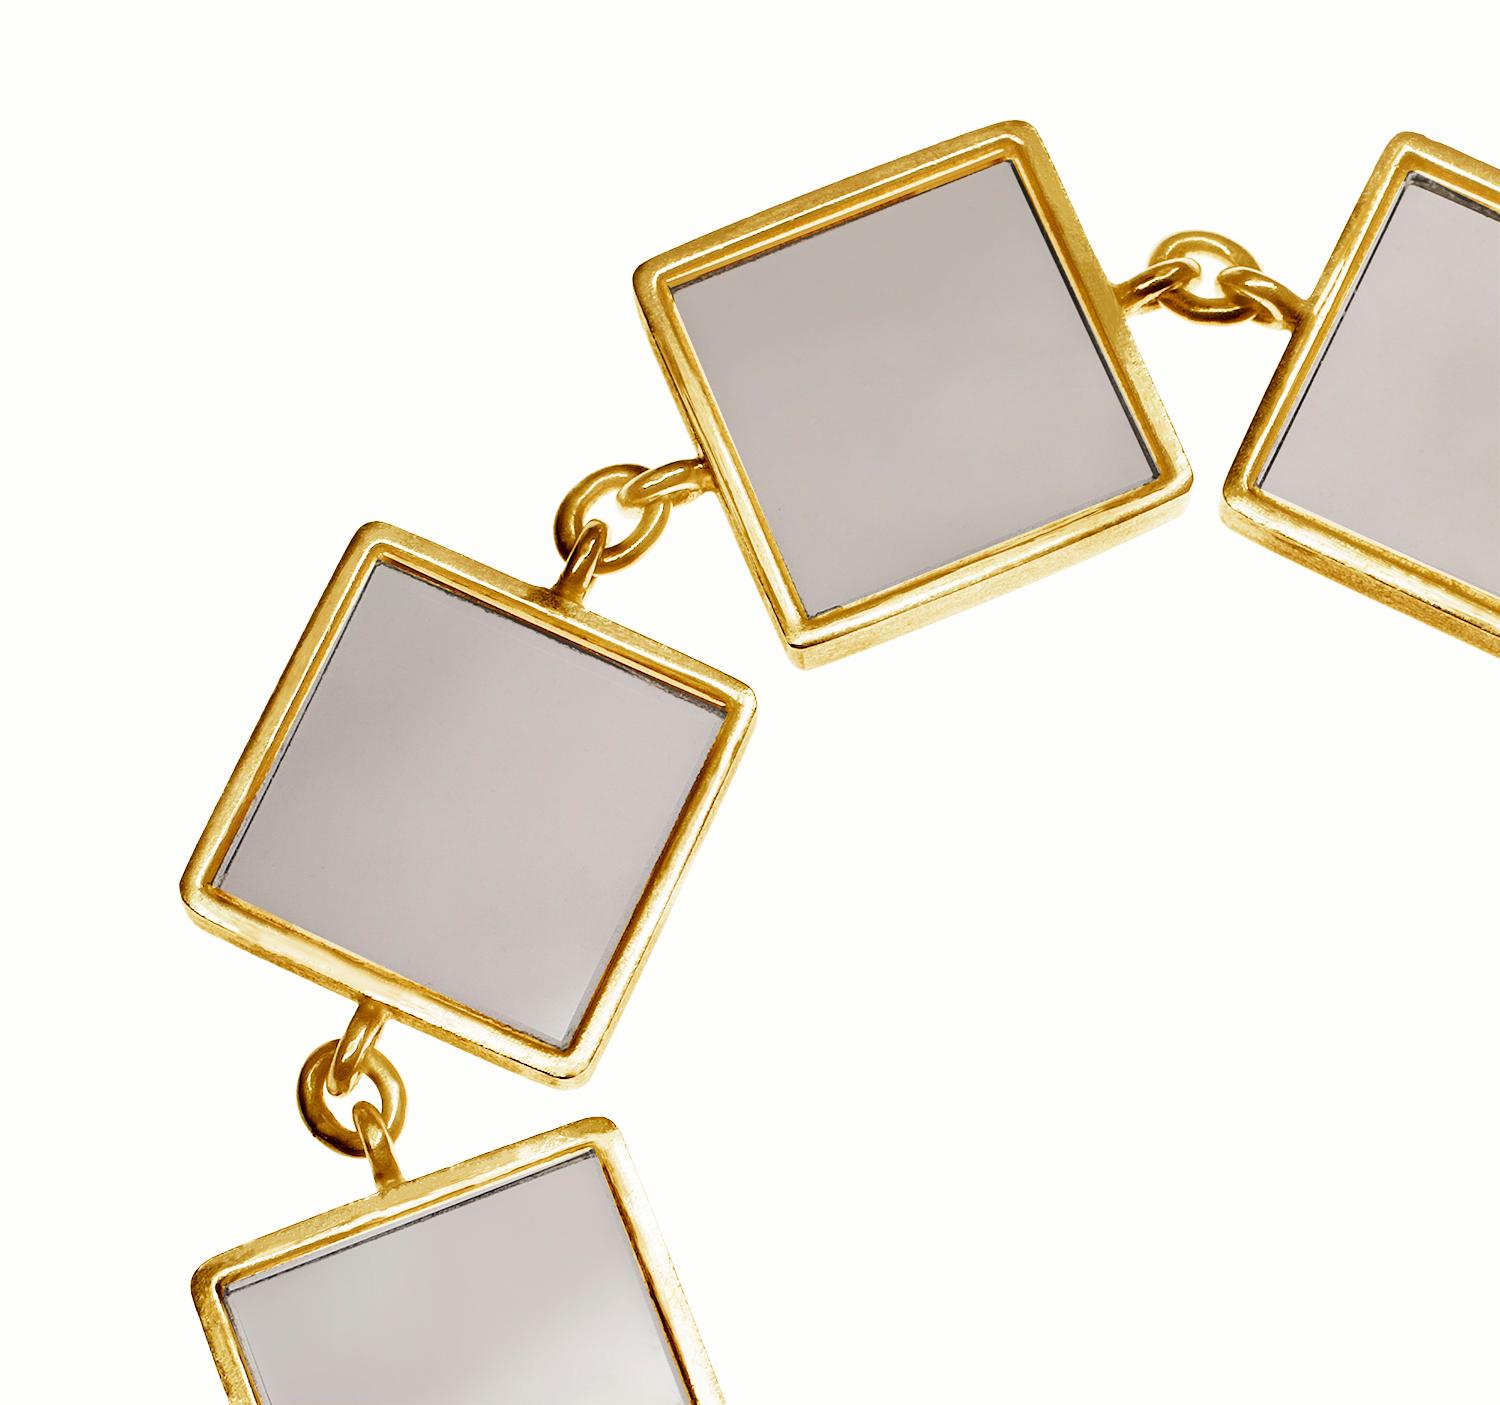 This designer jewellery Architectural bracelet is in 14 karat yellow gold with seven 15x15x3 mm smoky quartzes. The Ink collection was featured in Harper's Bazaar UA and Vogue UA published issues.

The bracelet shines gently because of the gold and